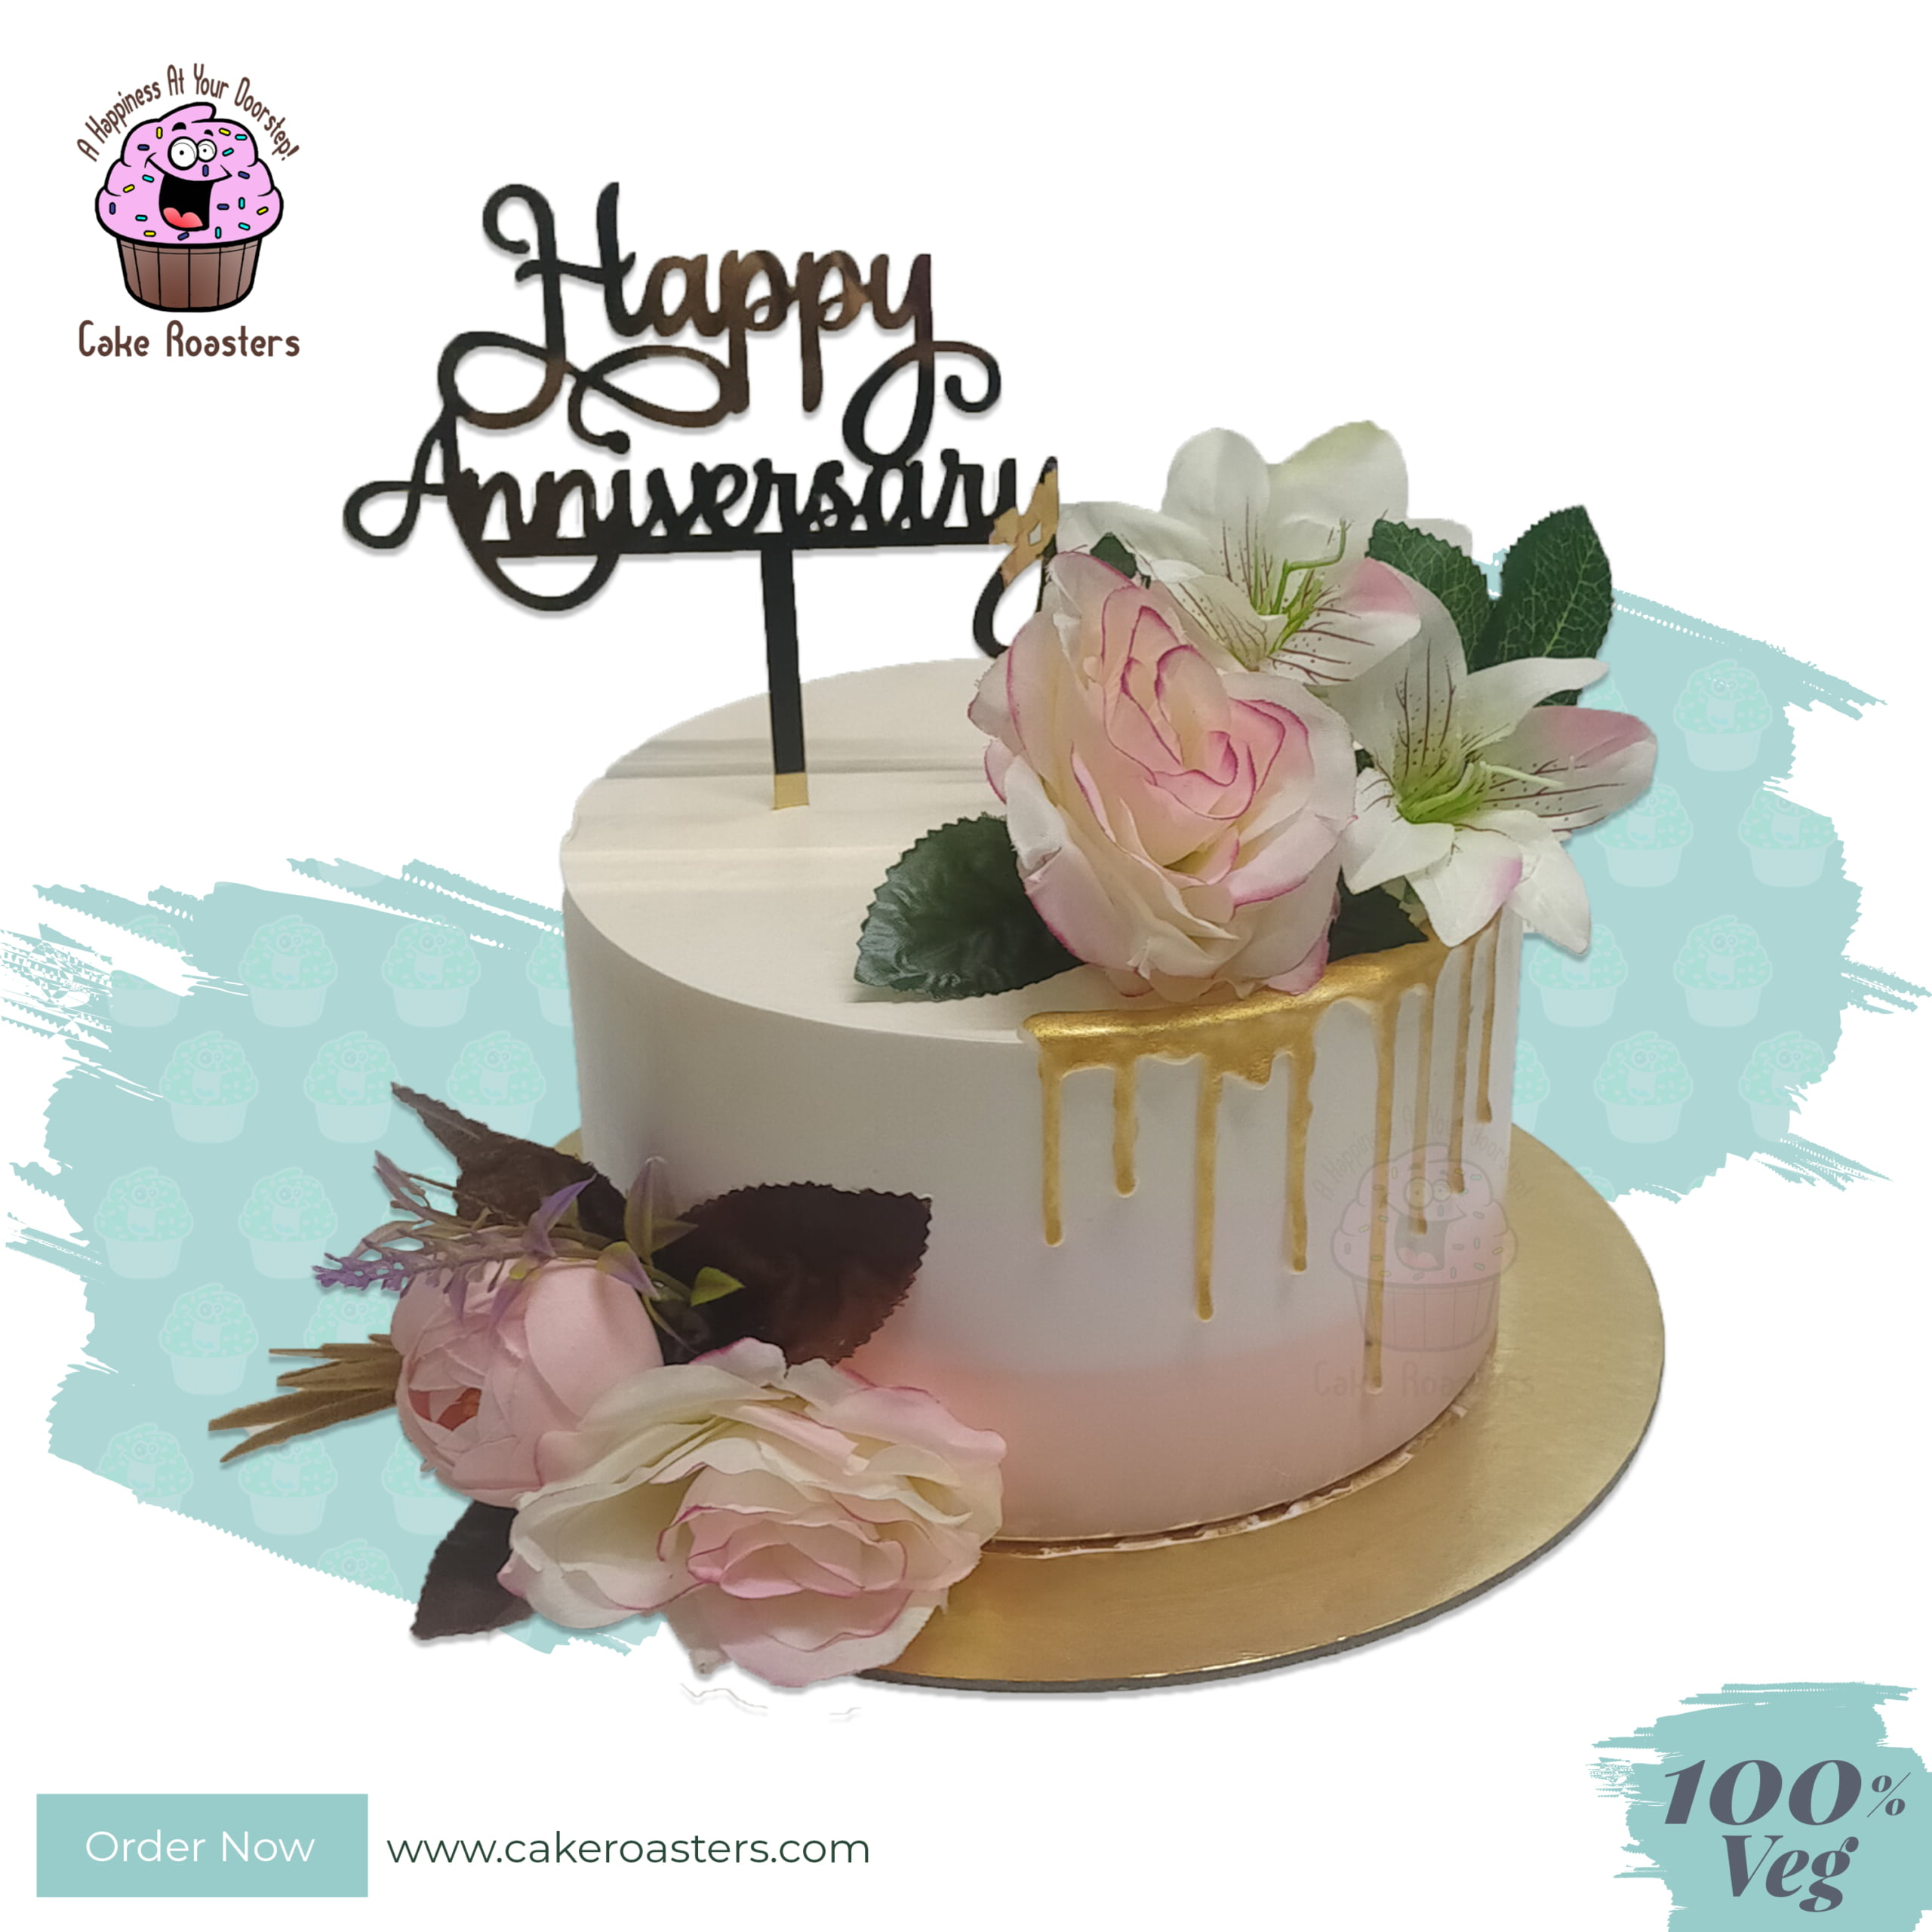 Buy happy anniversary cake Online at Best Price | Od-sonthuy.vn